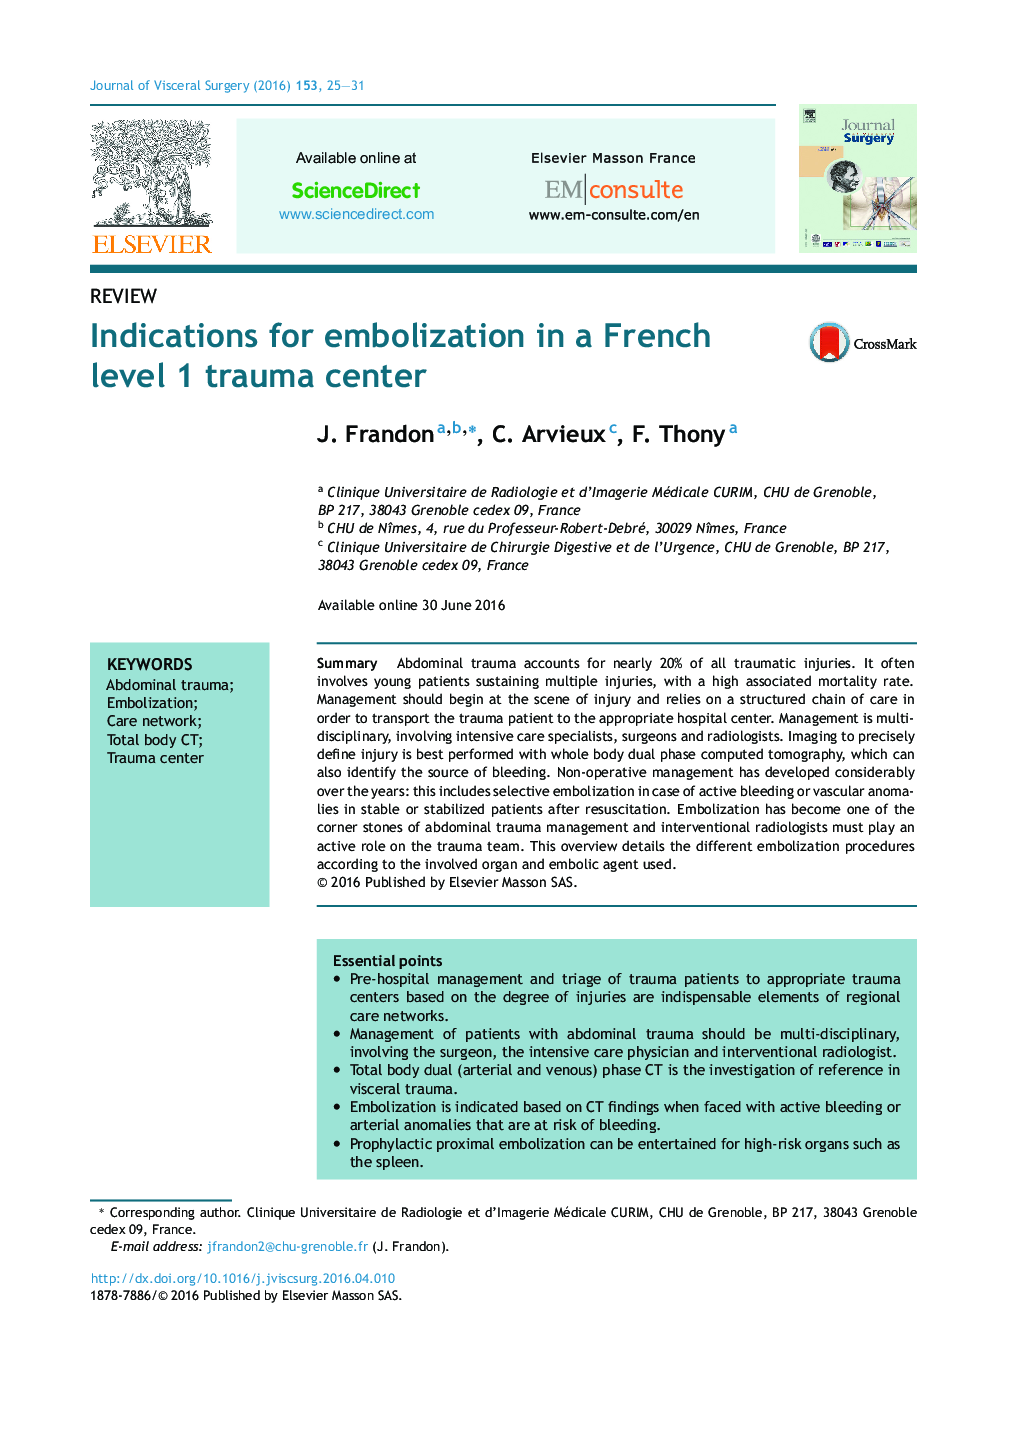 Indications for embolization in a French level 1 trauma center